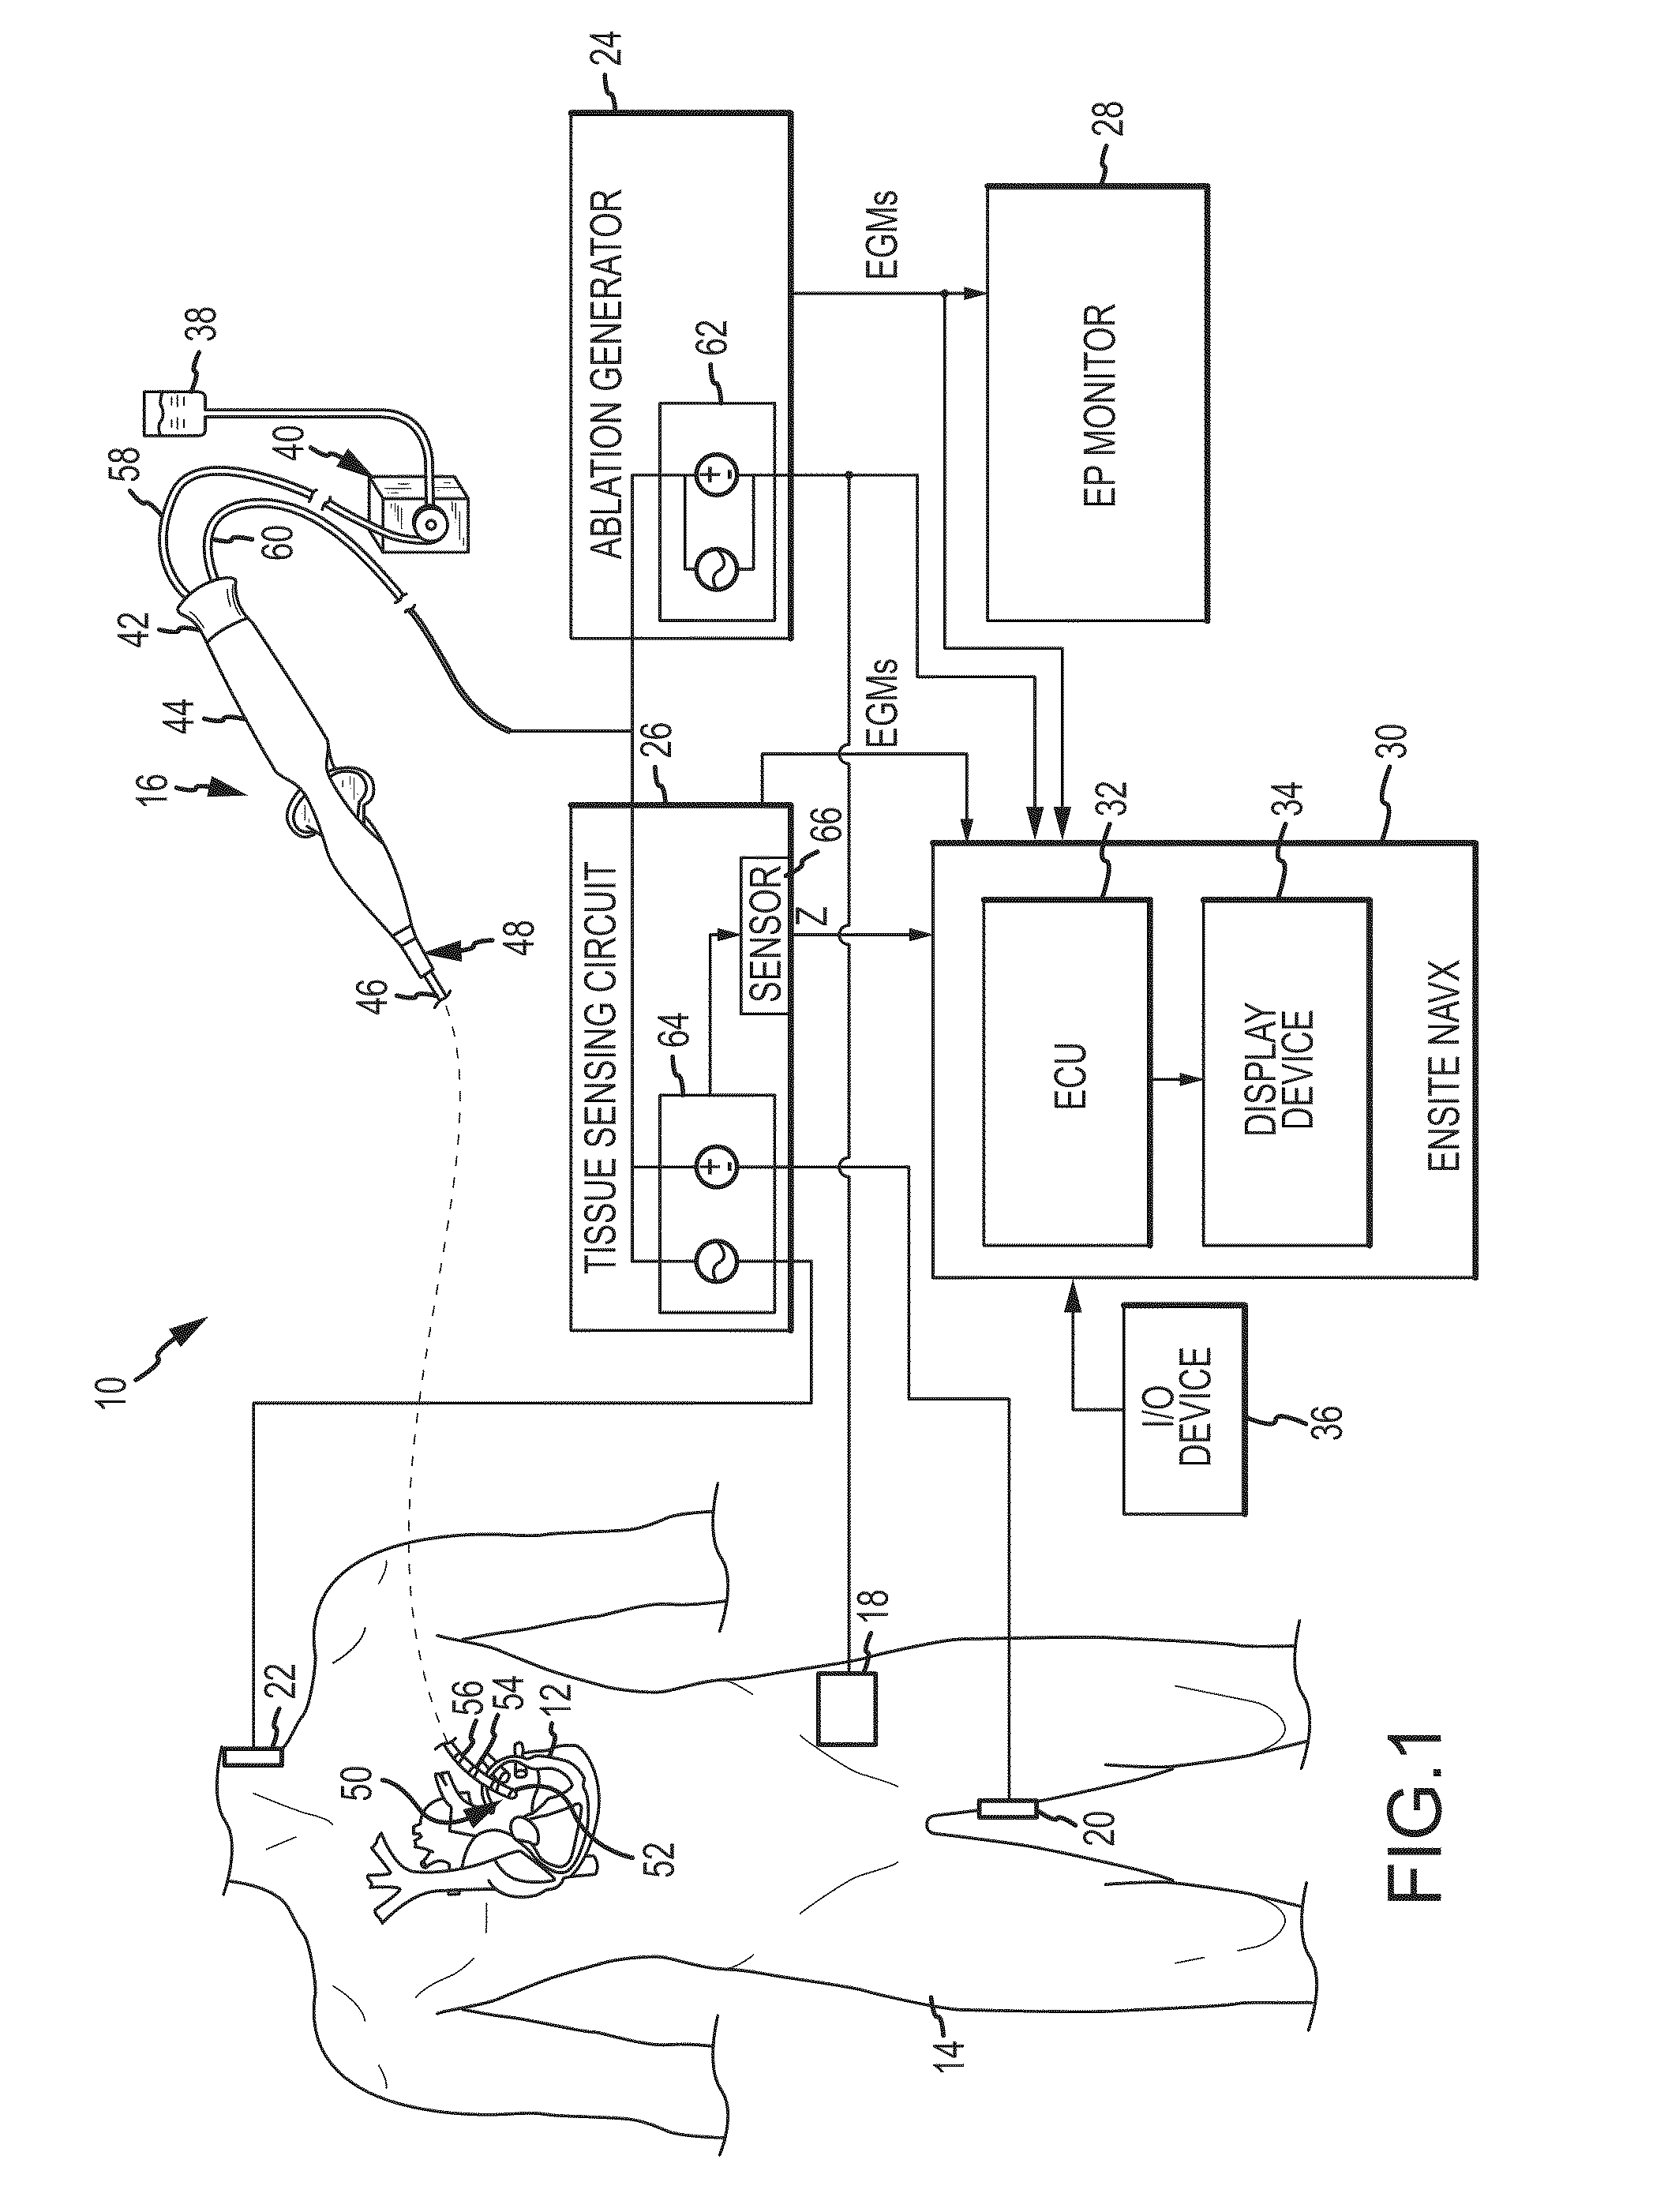 System and method for assessing effective delivery of ablation therapy